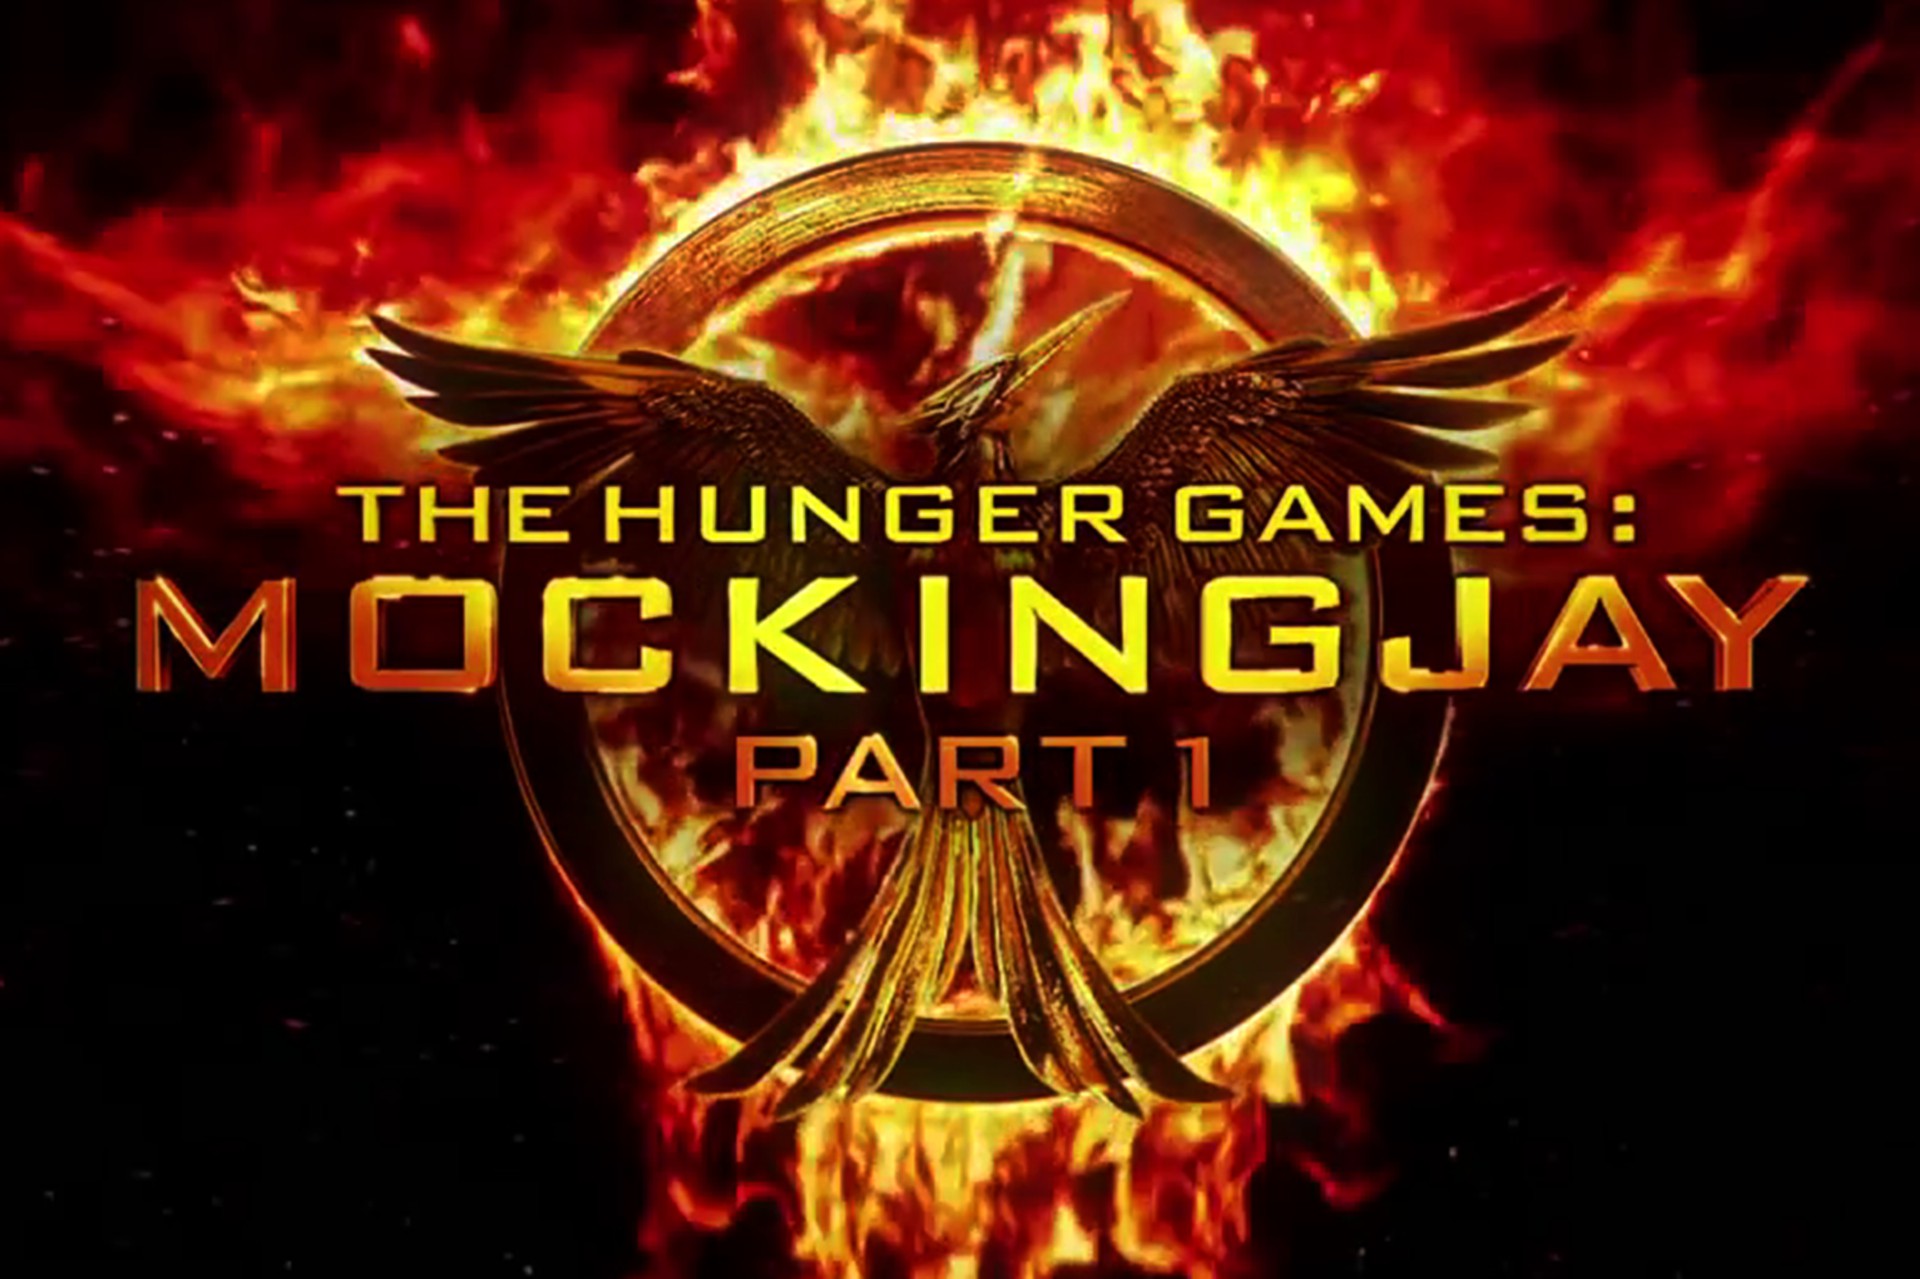 The Hunger Games: Mockingjay - Part 1 #3